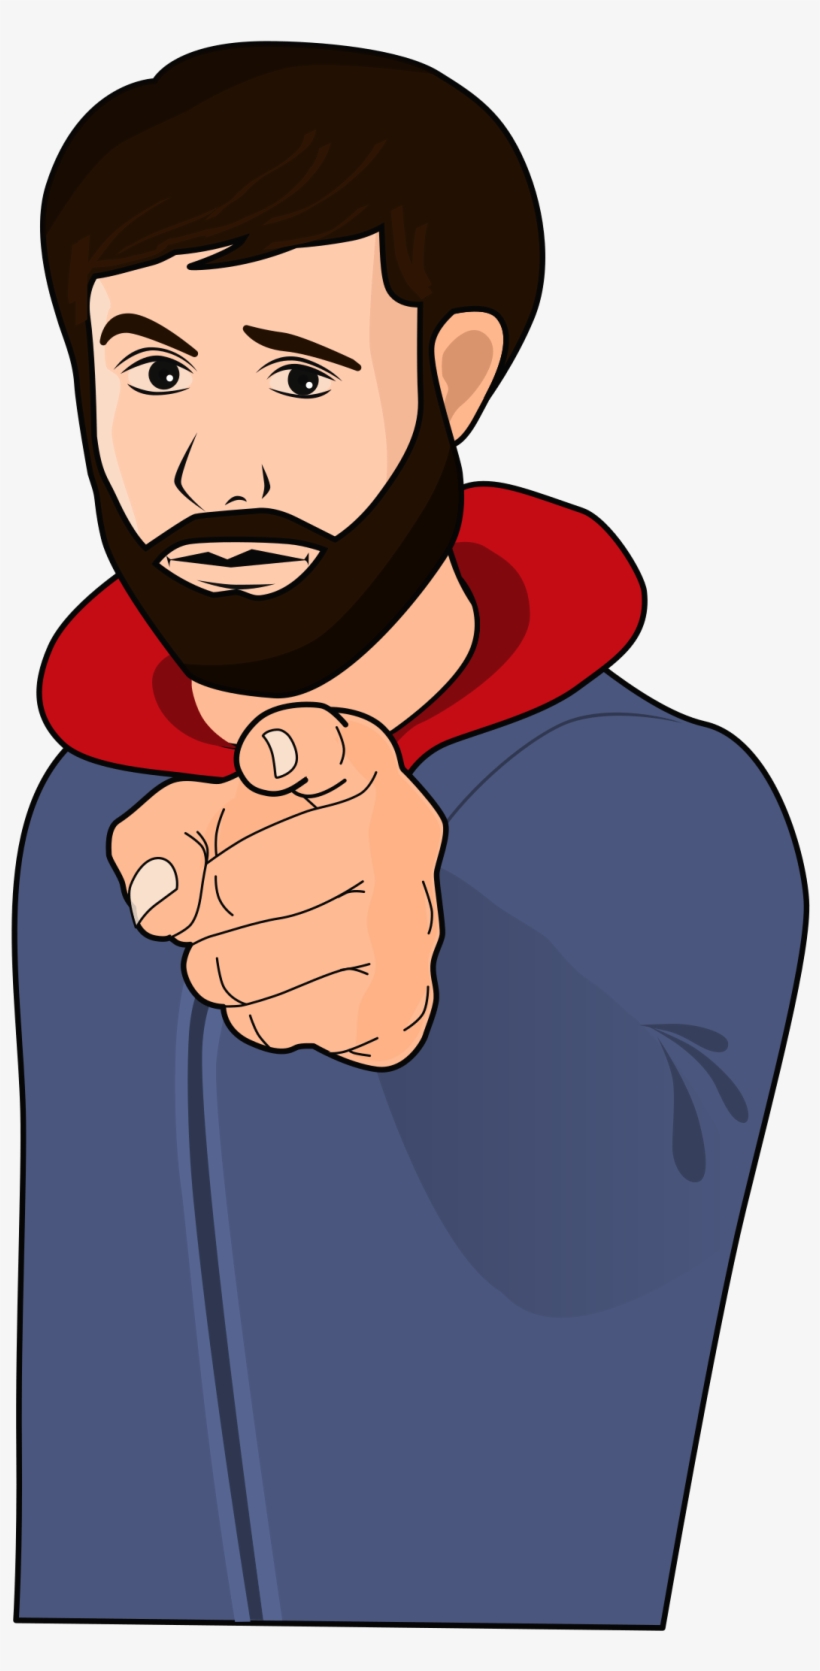 Finger Pointing At You Clip Art - Finger Pointing At You Png, transparent png #8124548